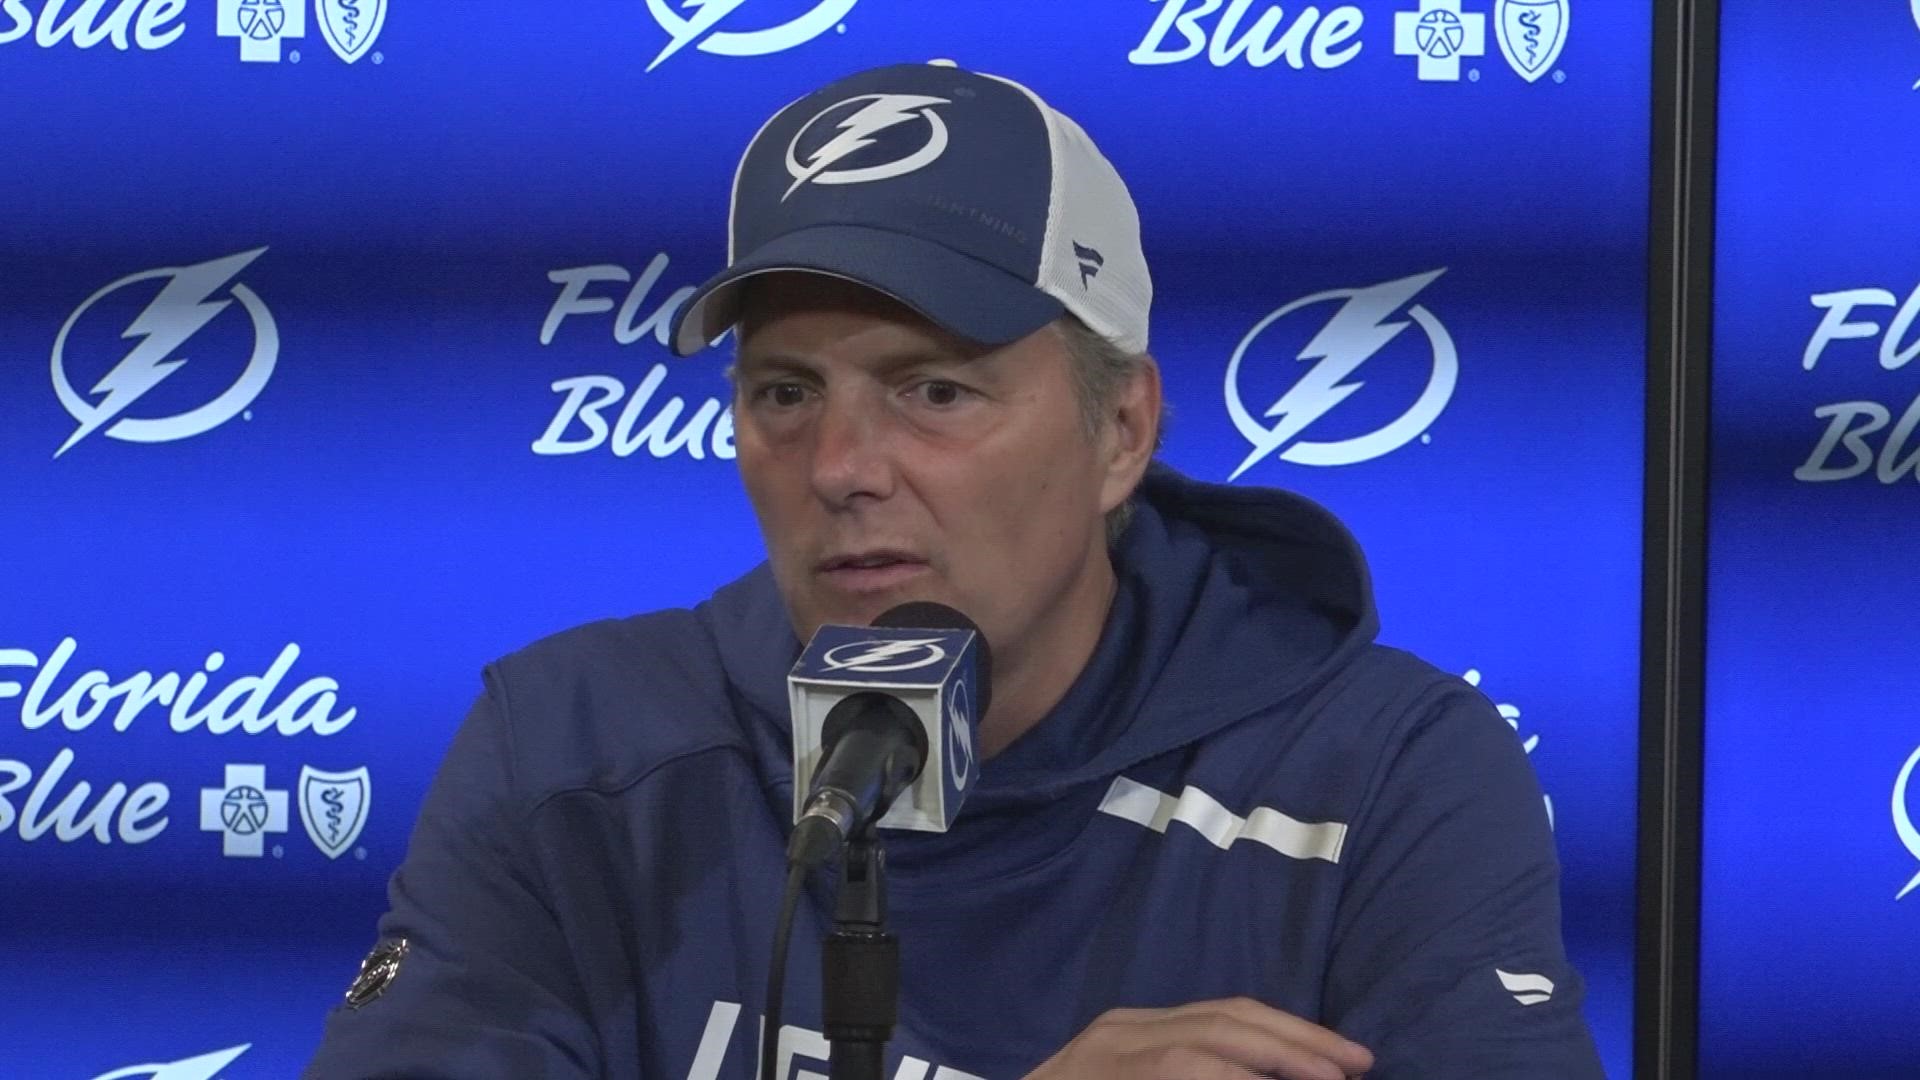 Hear from the Lightning coach on his contract extension